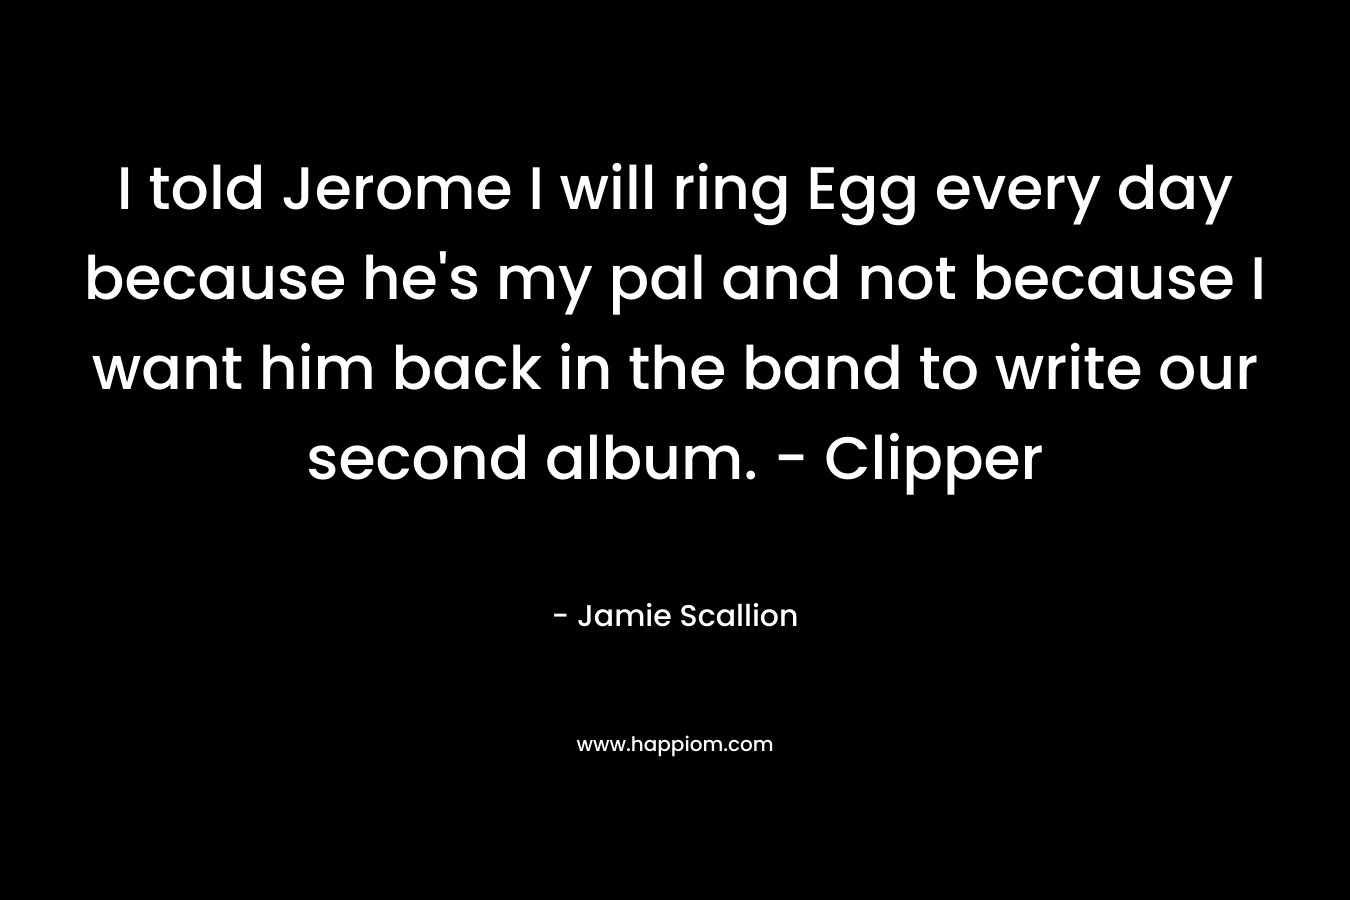 I told Jerome I will ring Egg every day because he's my pal and not because I want him back in the band to write our second album. - Clipper